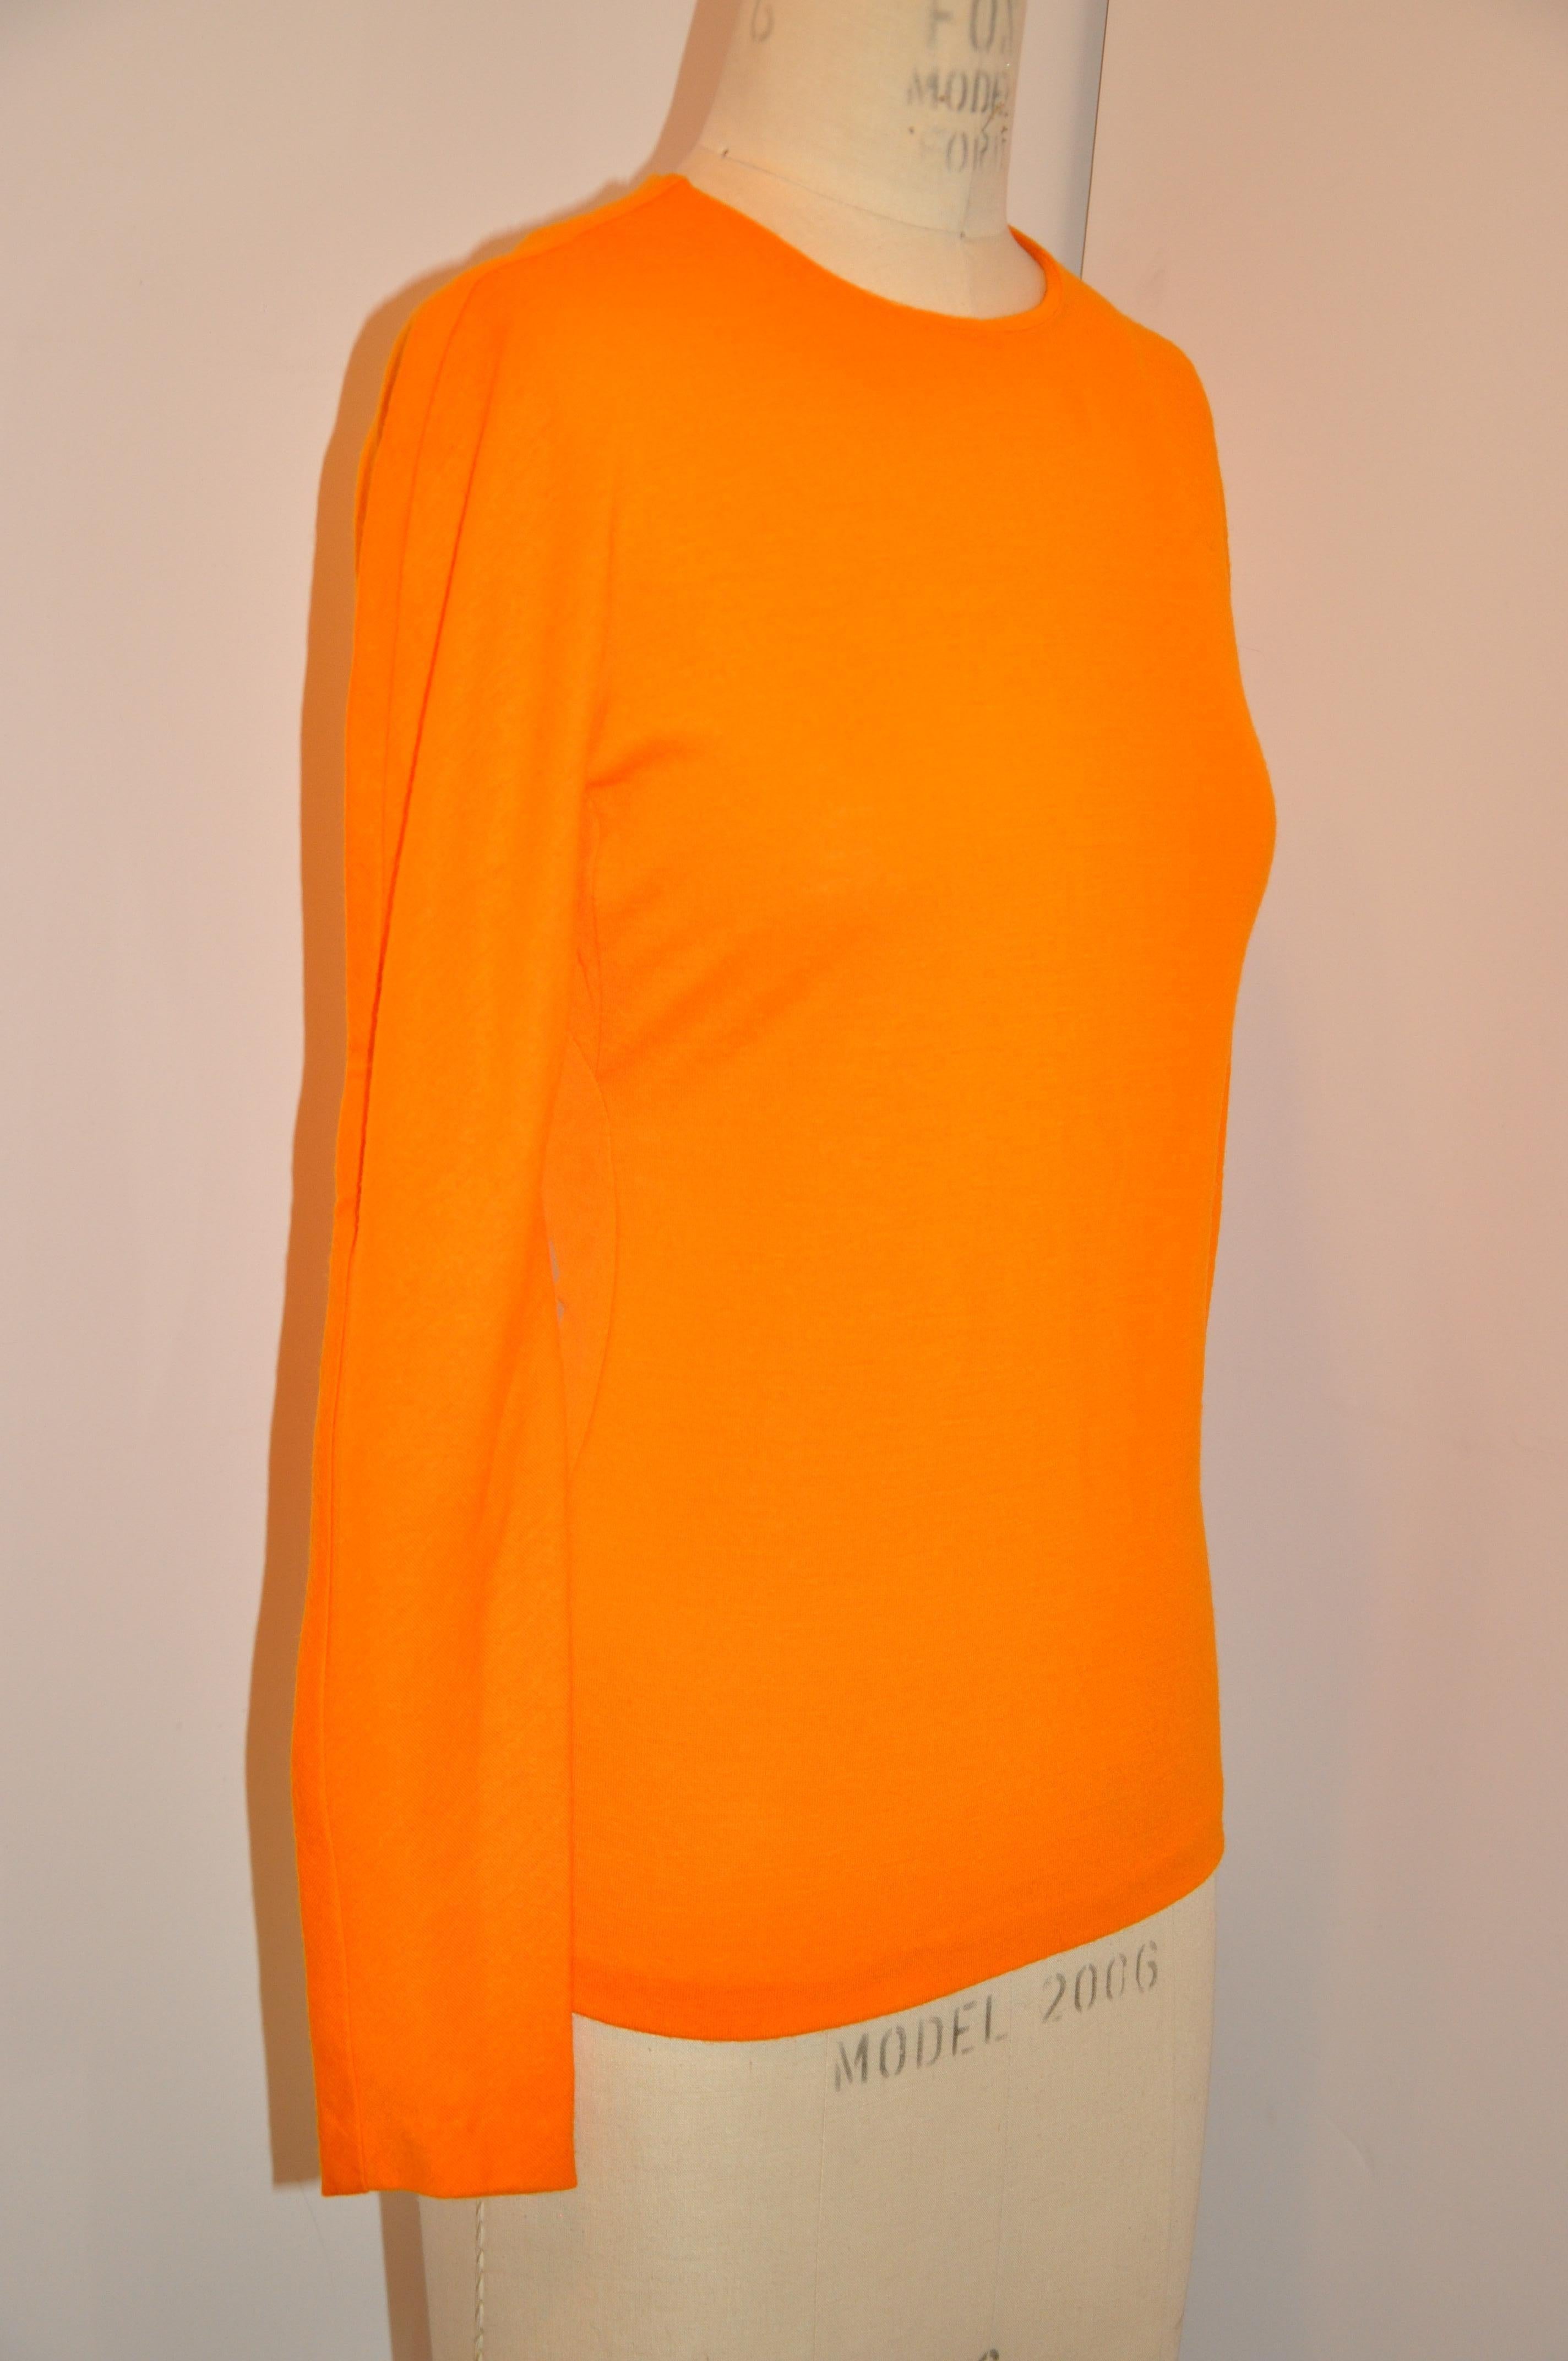 Orange Rare Stephen Sprouse Warm Tangerine Wool Jersey Pullover Top For Sale